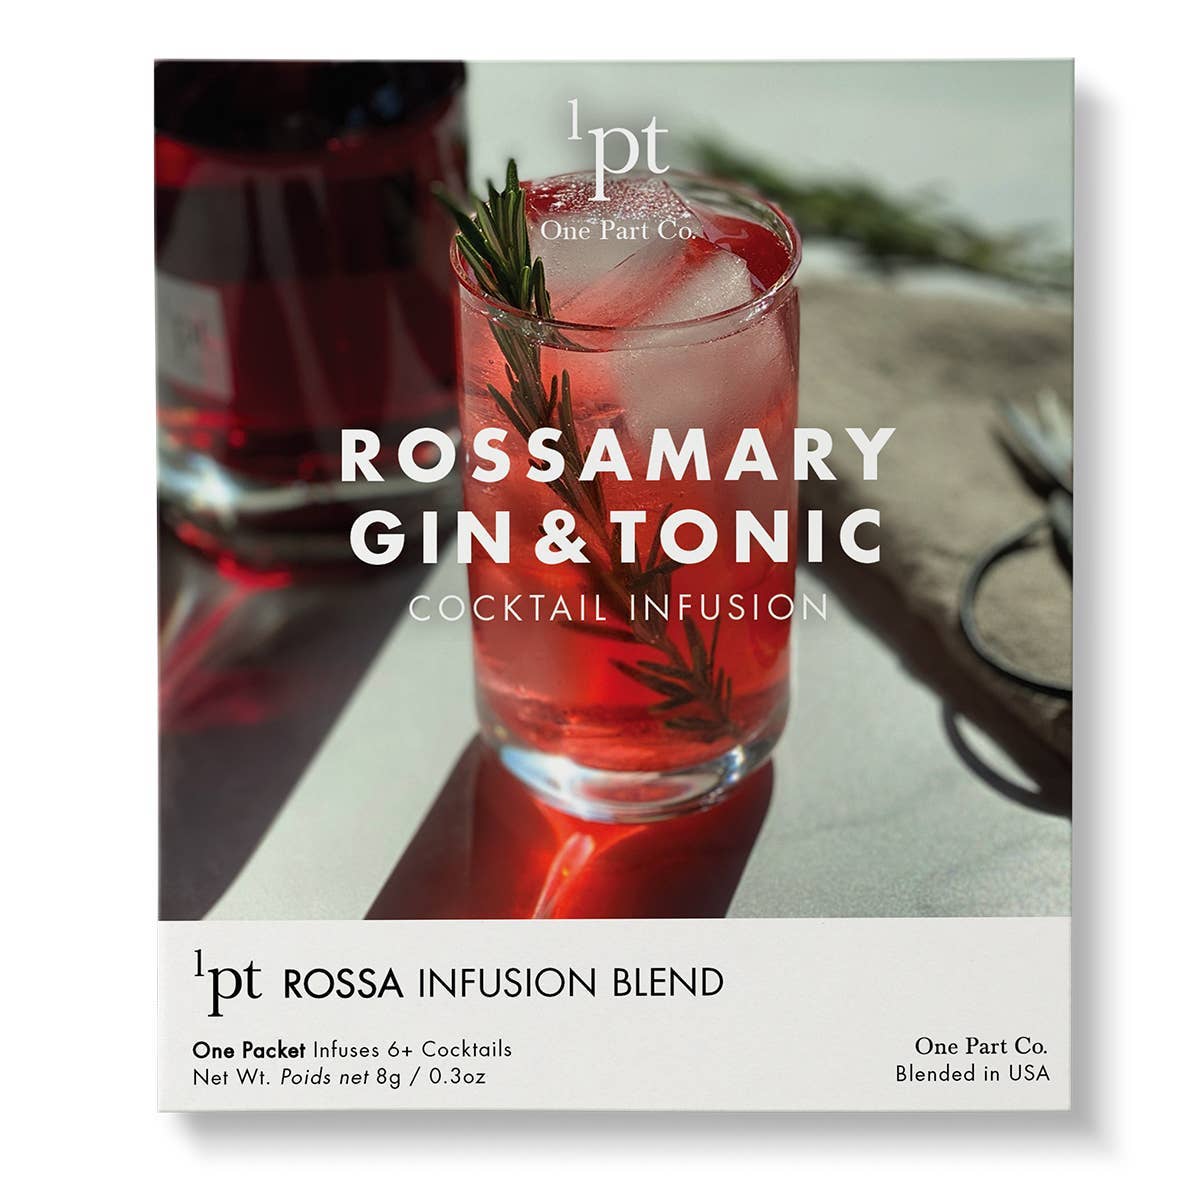 Rossamary Gin & Tonic Cocktail Infusion Kit